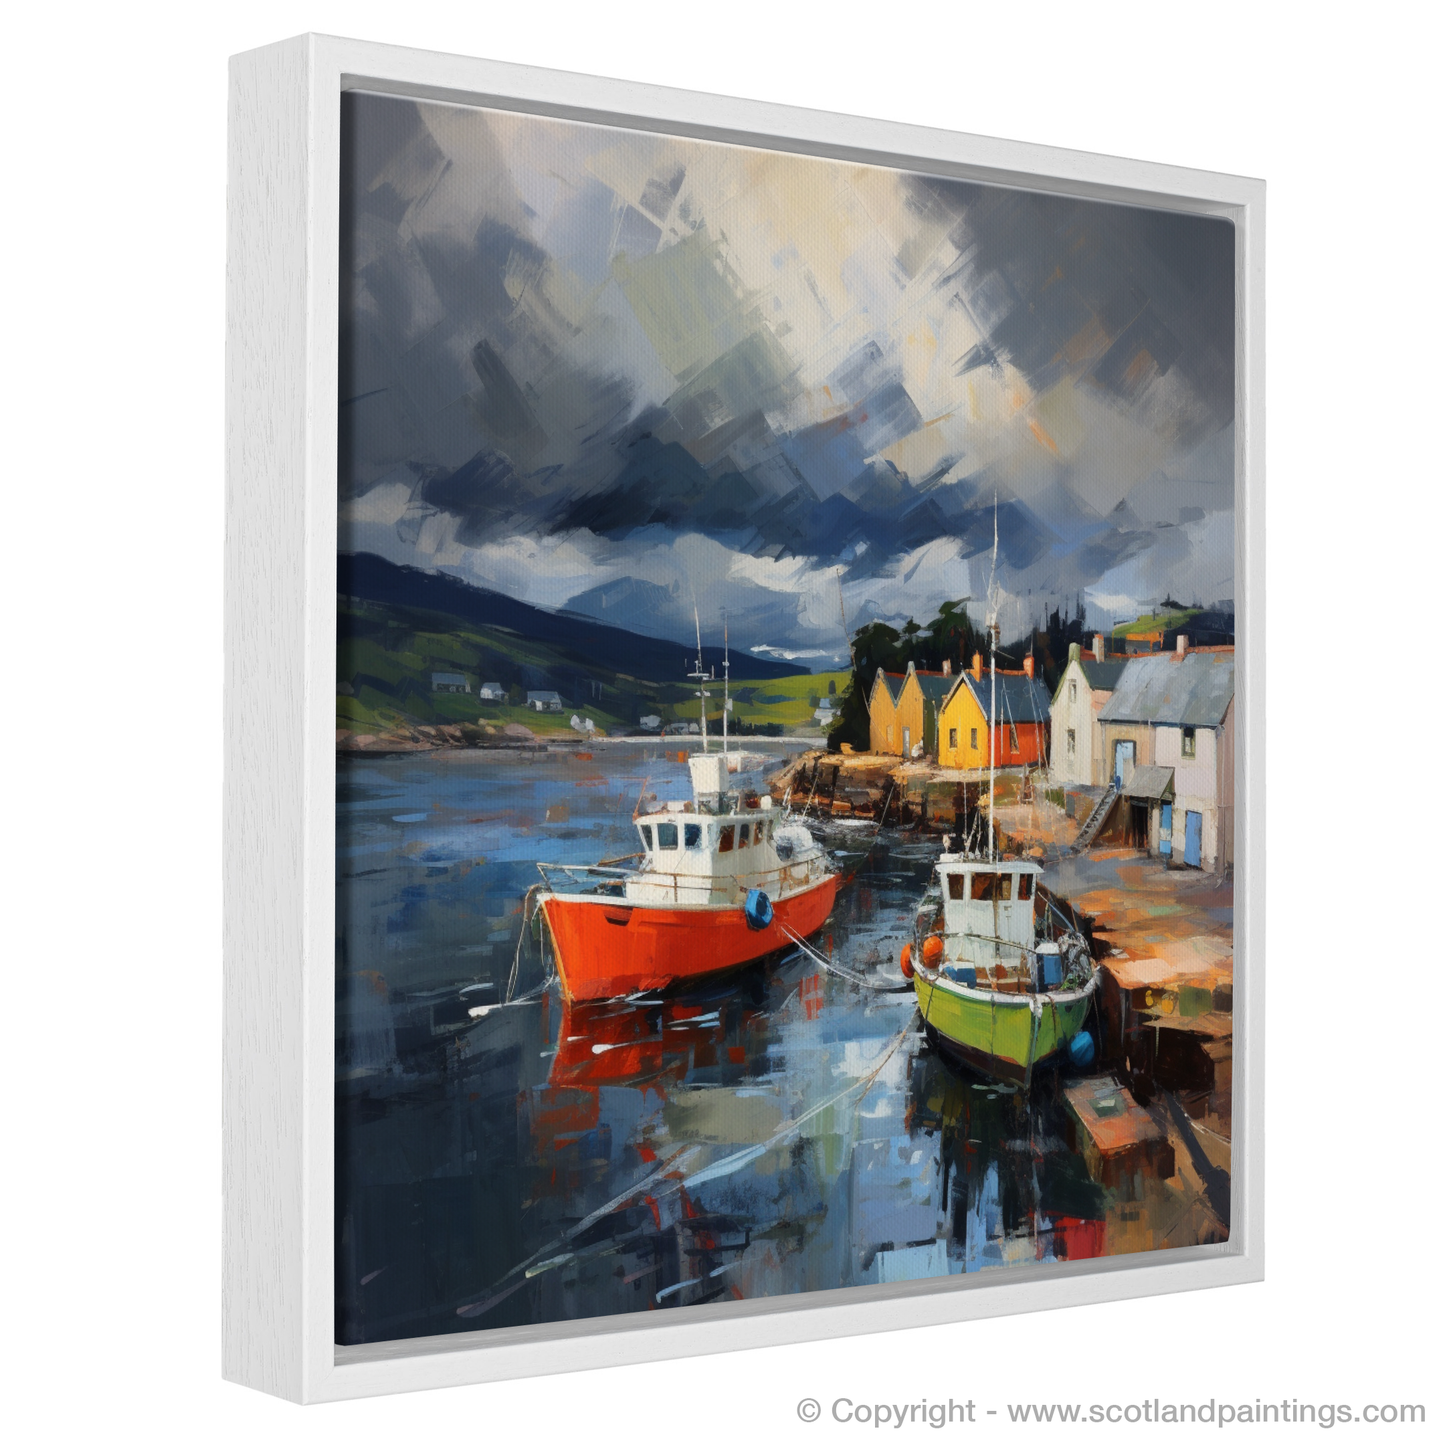 Painting and Art Print of Cromarty Harbour with a stormy sky entitled "Storm's Embrace over Cromarty Harbour".